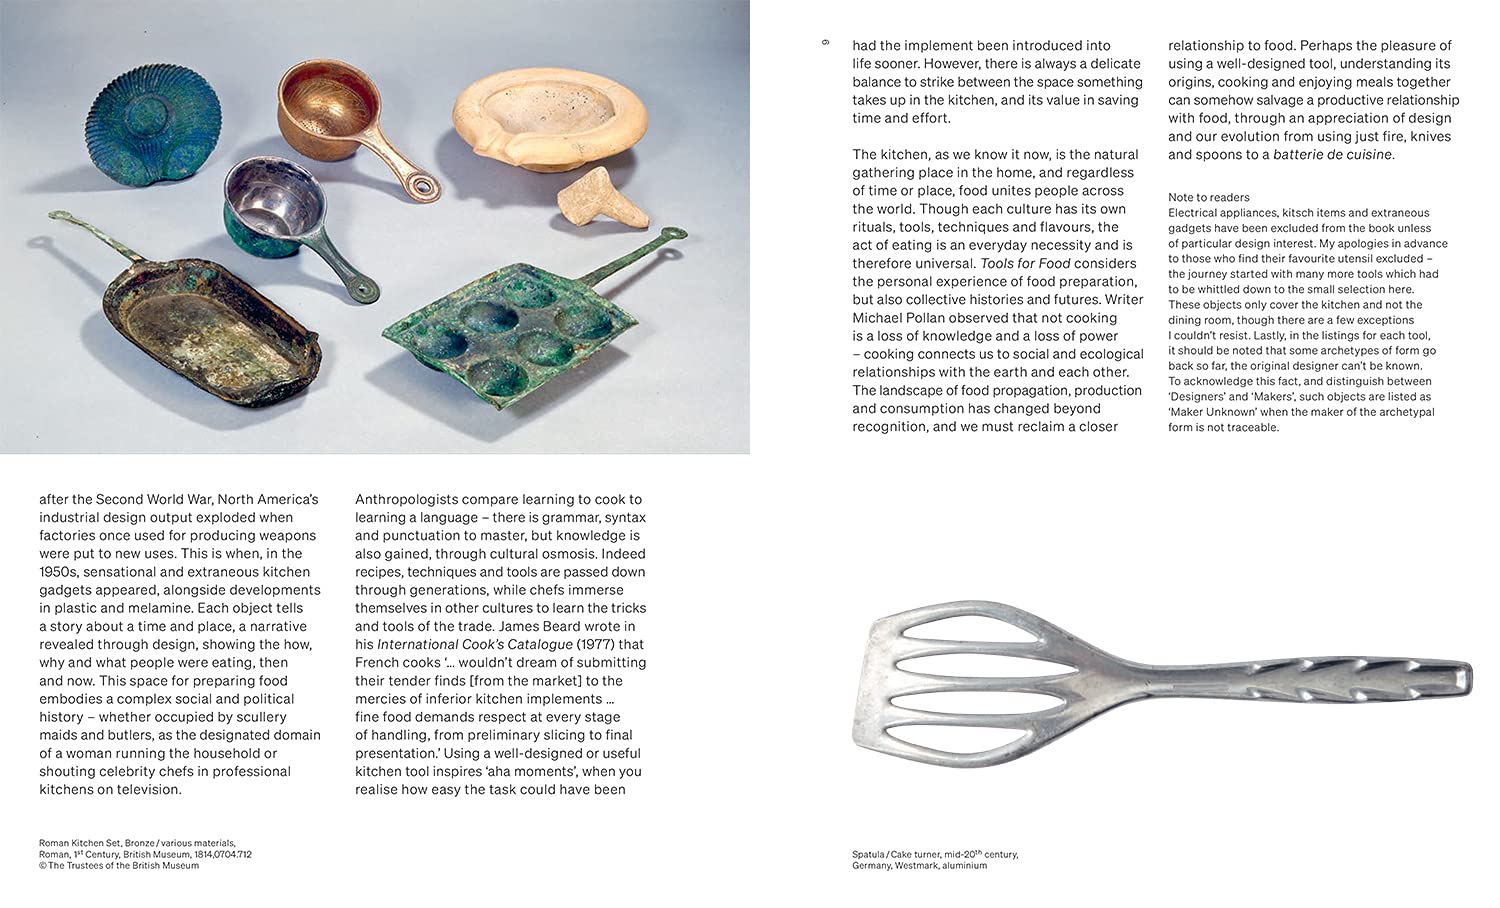 Tools for Food: The Stories Behind the Objects that Influence How and What We Eat (Corinne Mynatt)